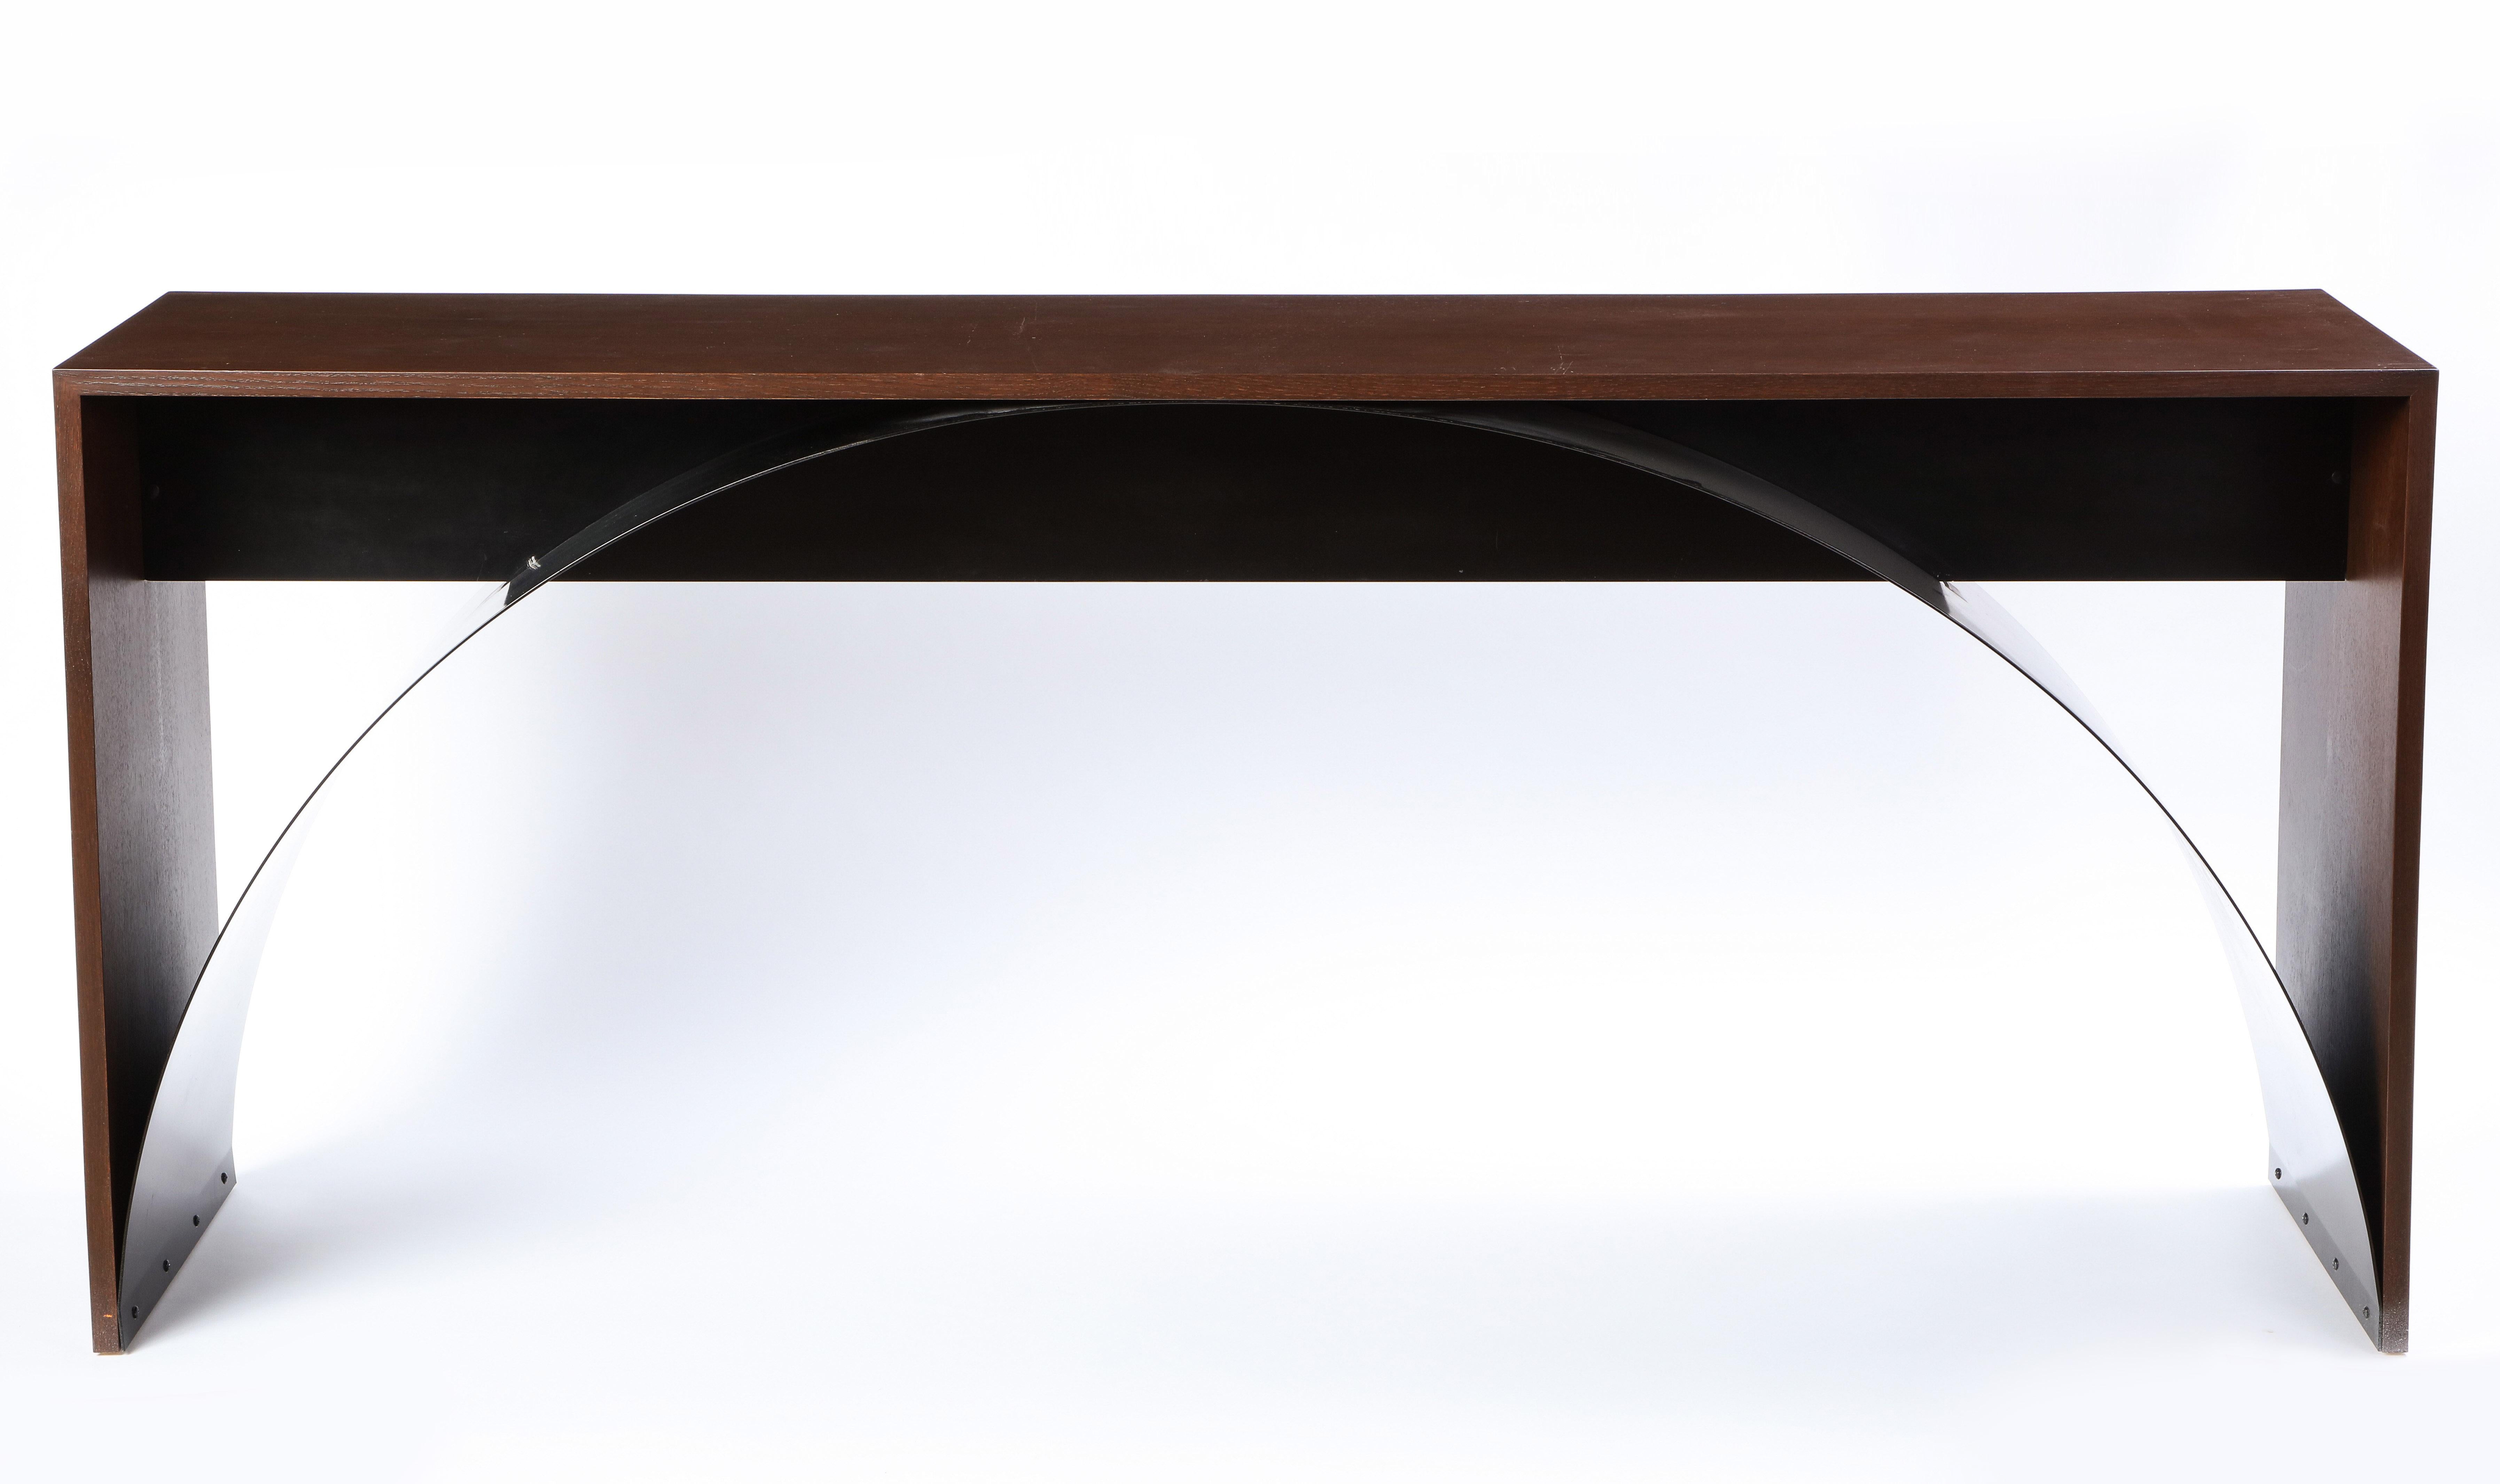 This modern console table is composed of a stained oak frame with a black painted metal sheet spanning in an arch from foot to foot. The formal simplicity and the crispness of the lines highlights the subtle and nuanced workmanship of the piece -